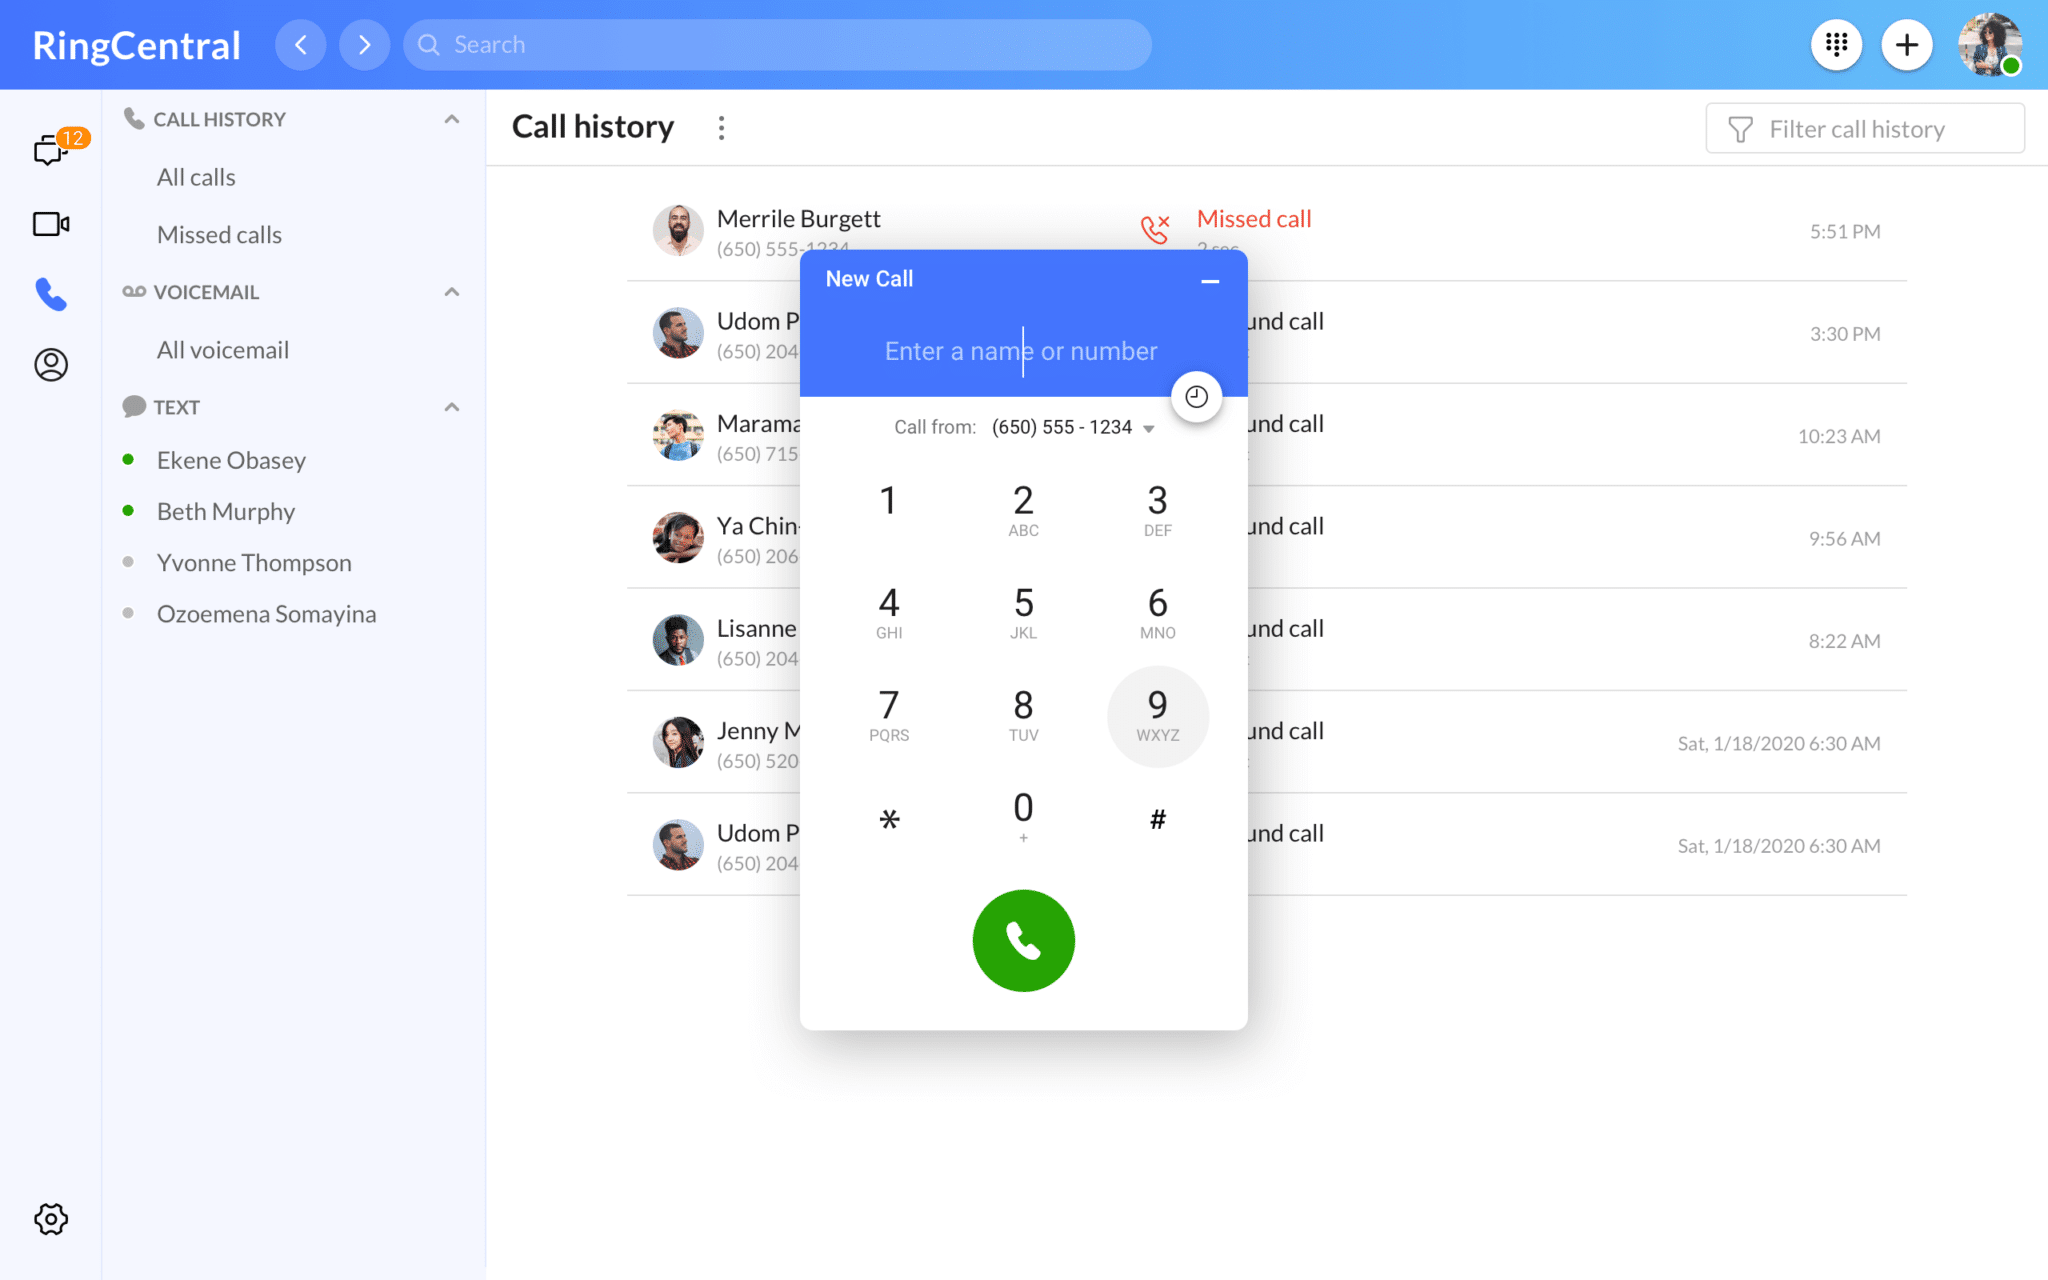 Call history dialpad RingCentral Office product